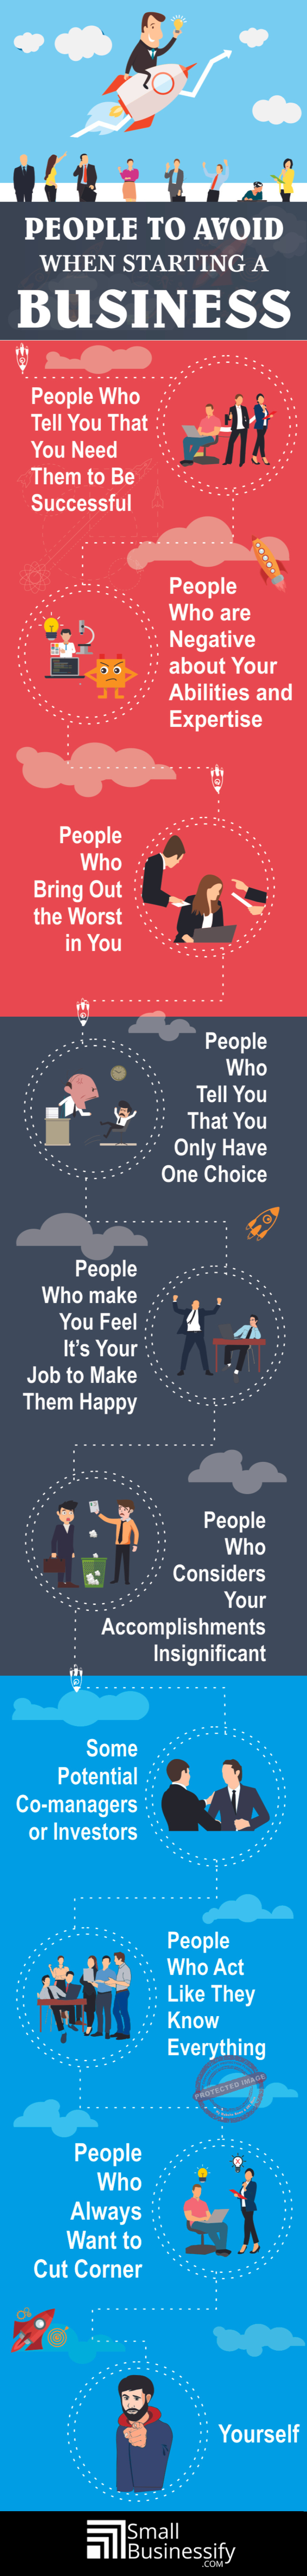 People To Avoid When Starting A Business infographic